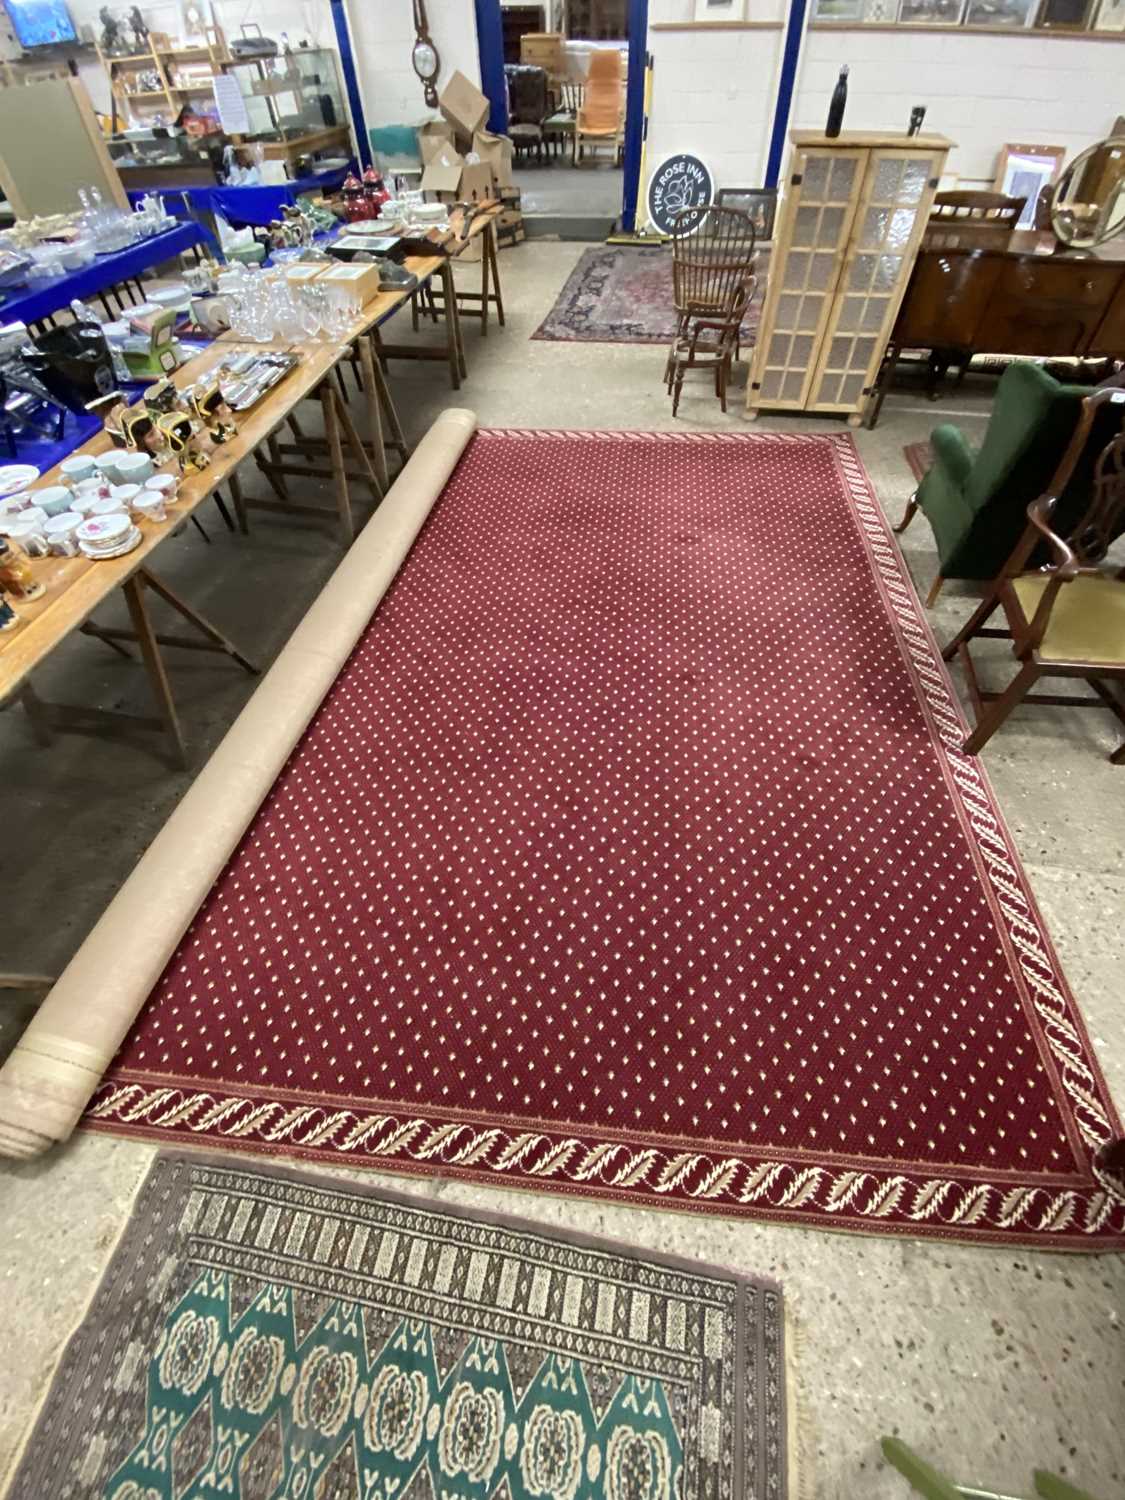 An extremely large modern maroon red floor rug with floral border